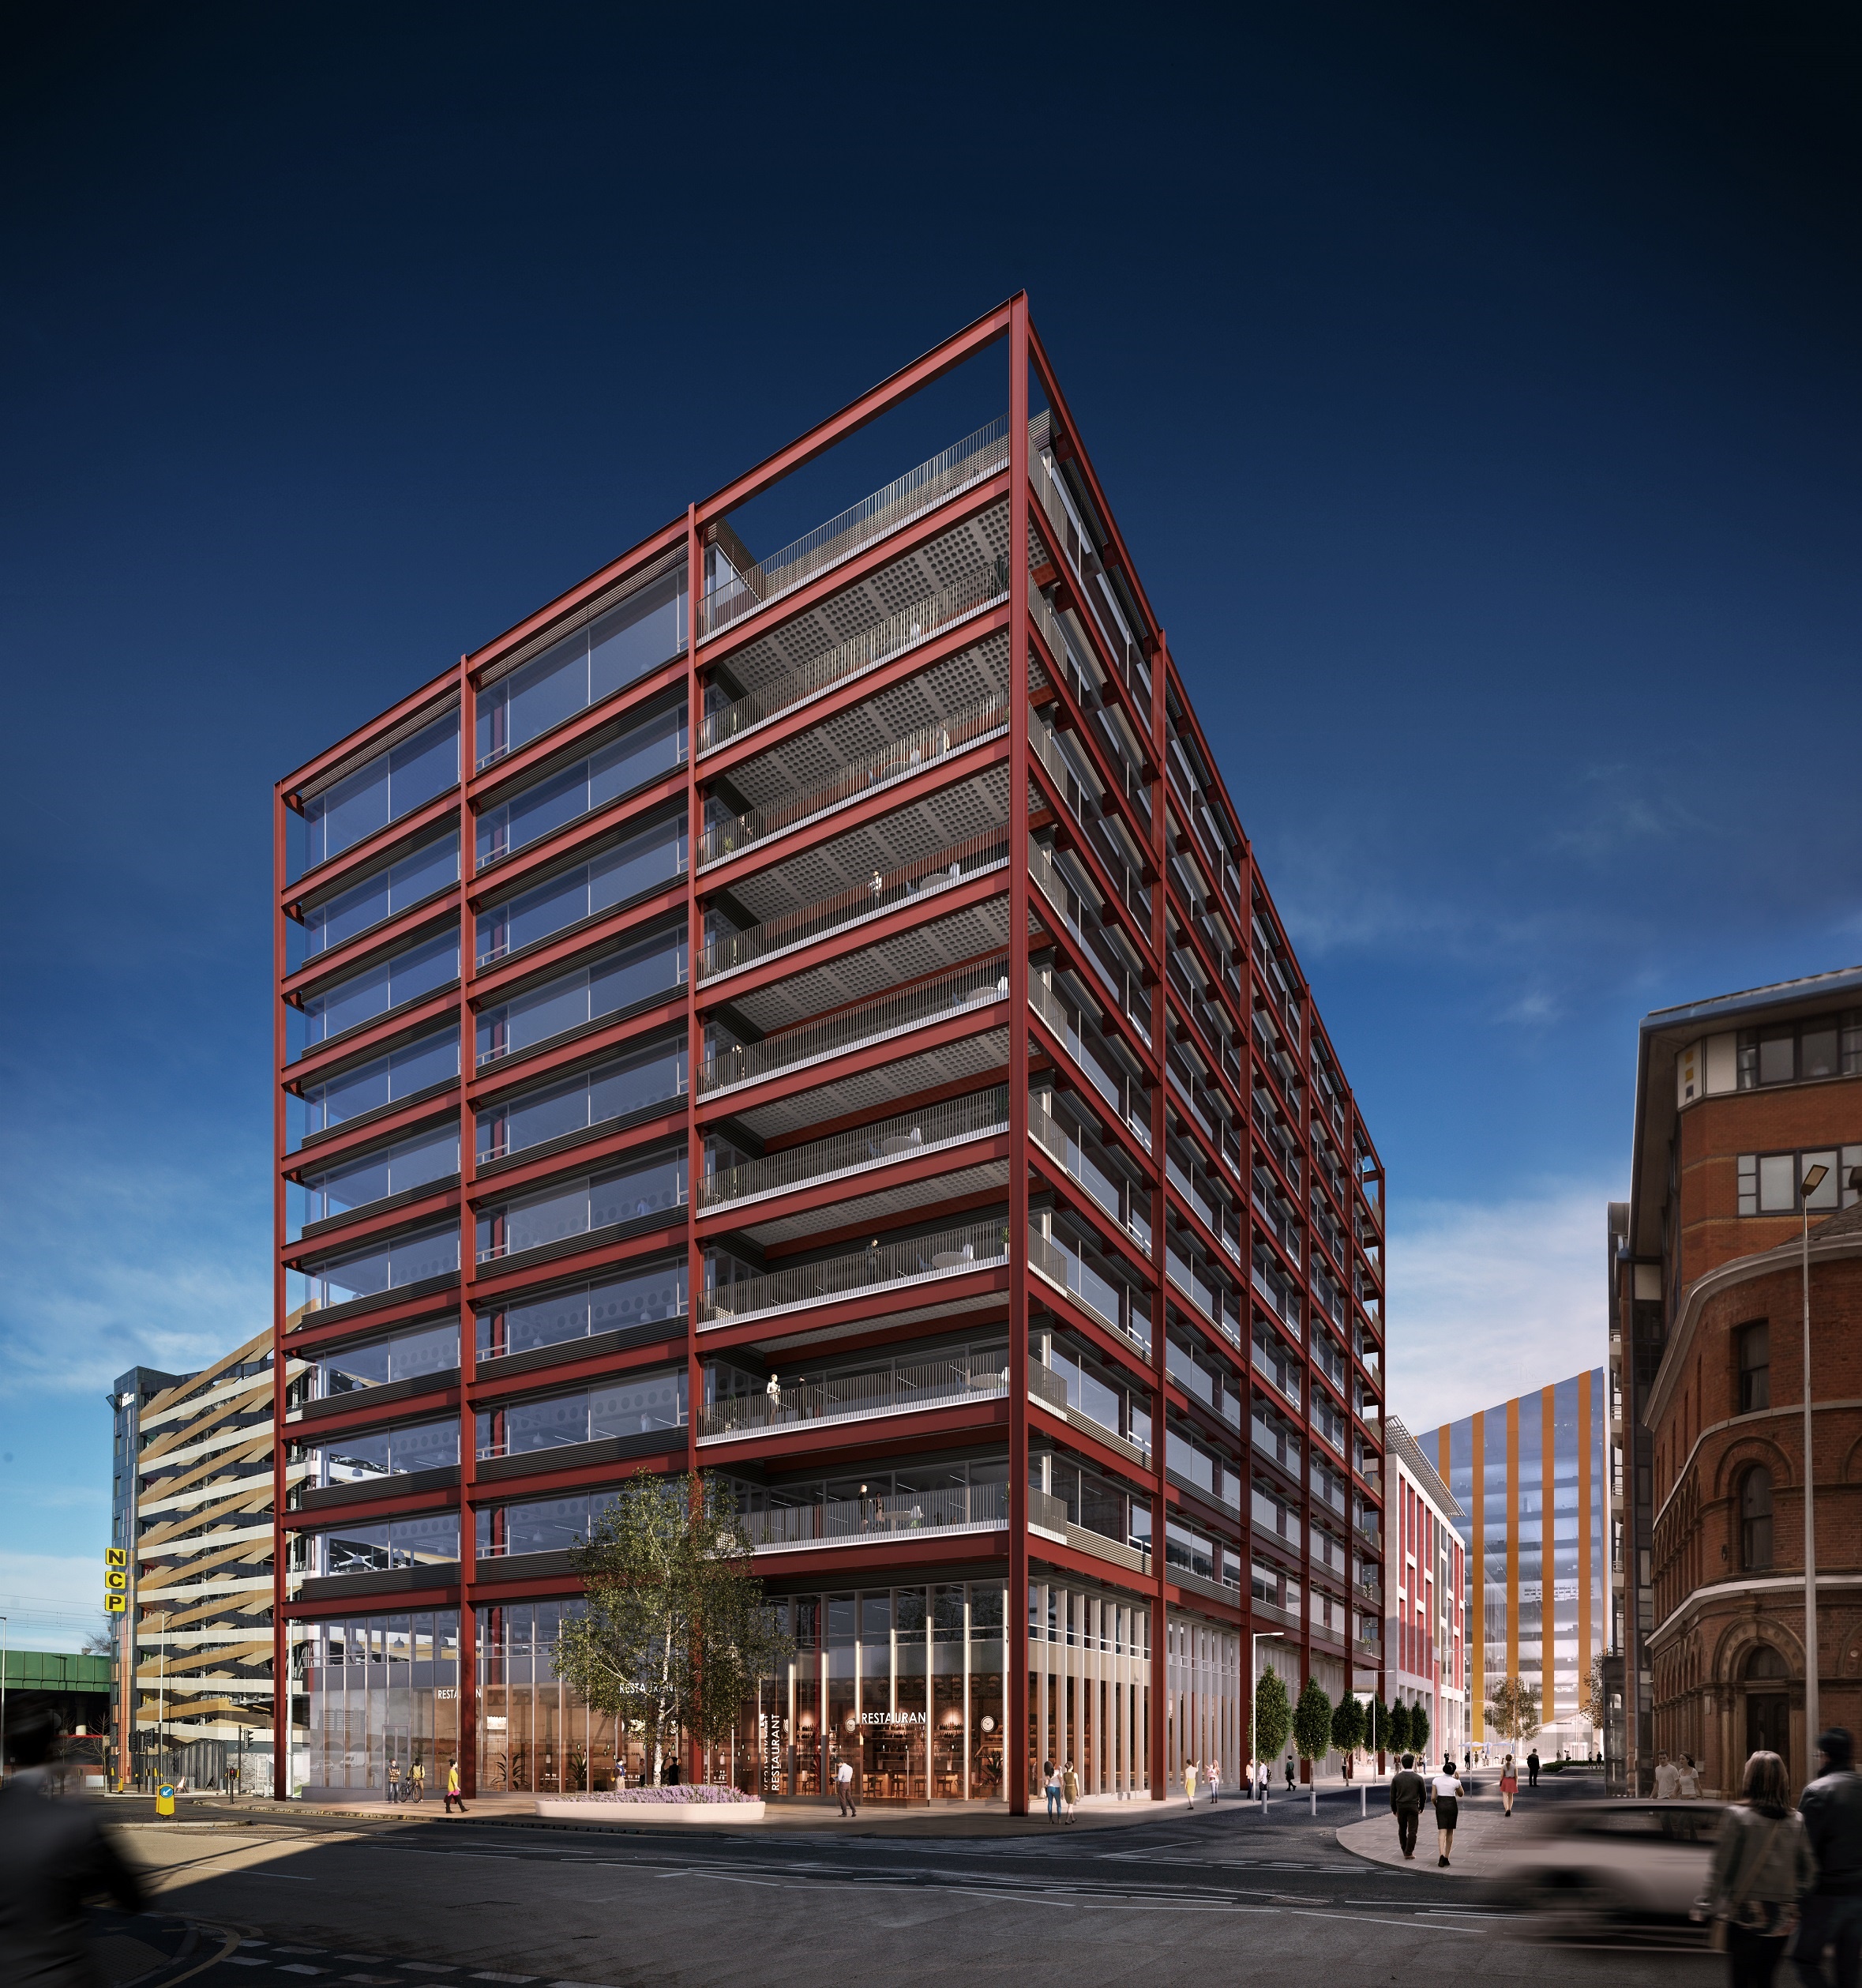 Two New Bailey Square building in Manchester